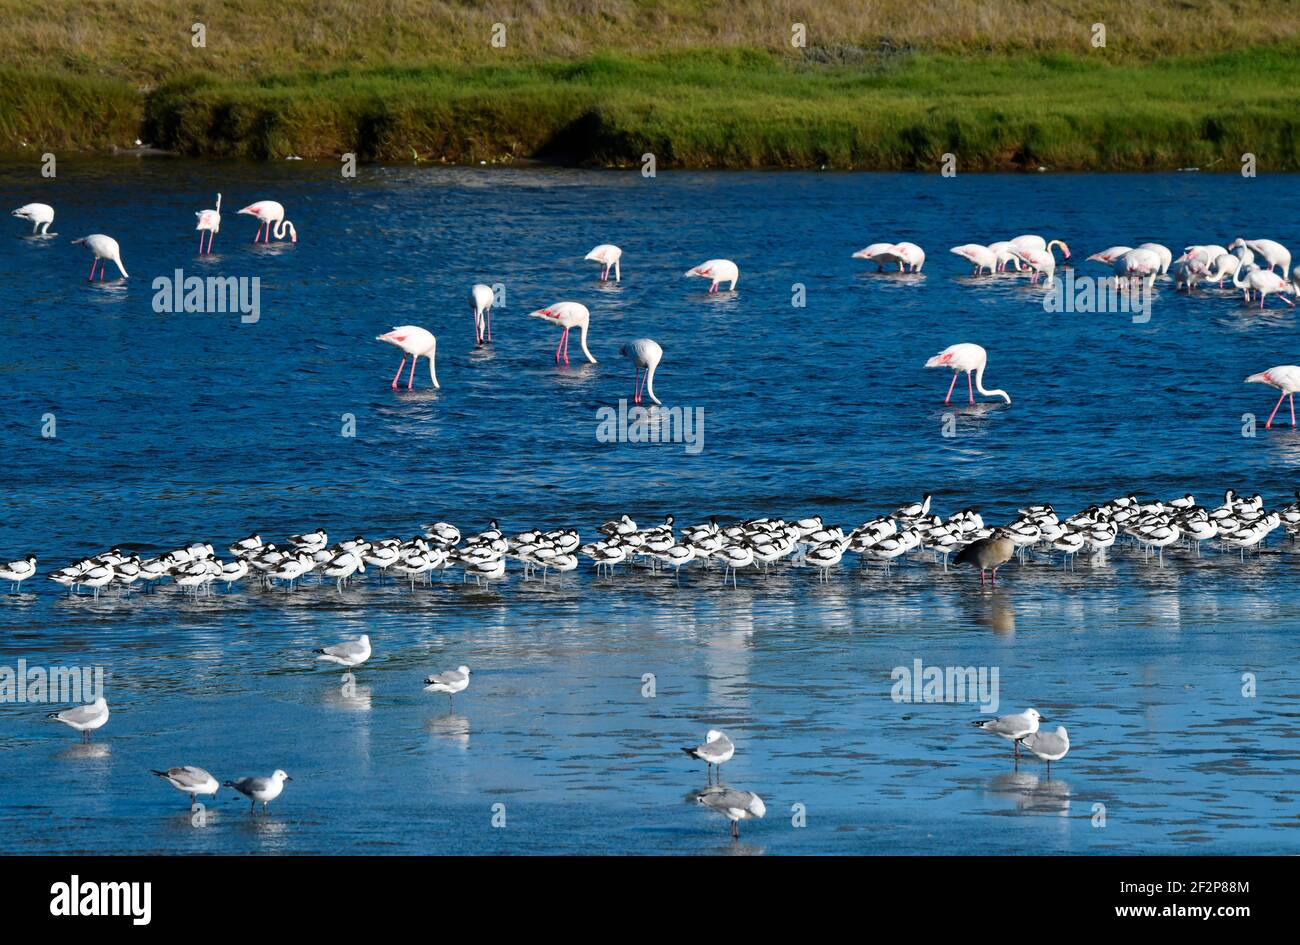 Gulls, Pied Avocets and Greater Flamingos at Woodbridge Island, Cape Town, South Africa. Stock Photo